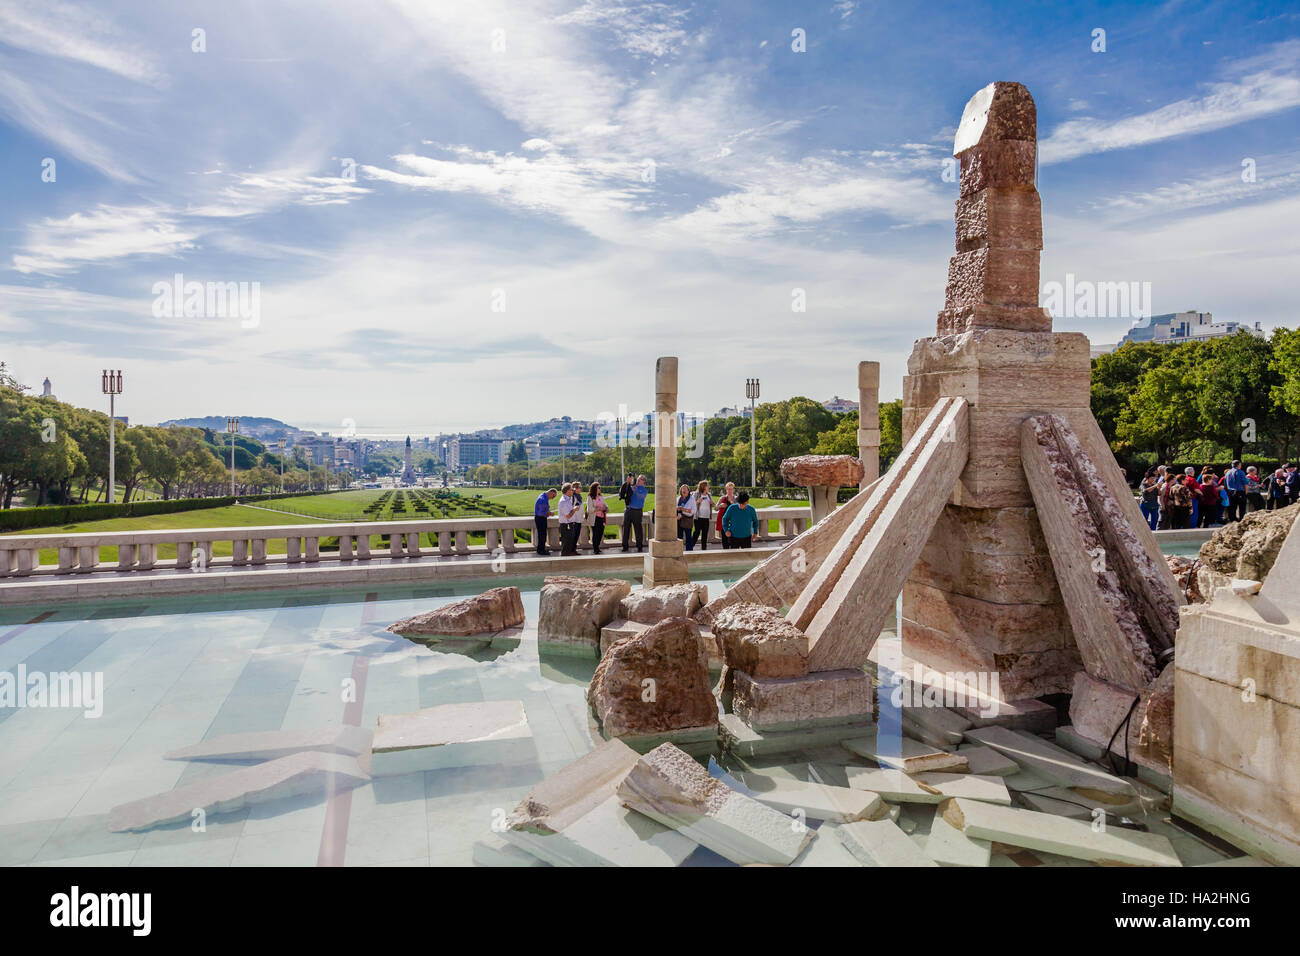 Eduardo VII Park. Controversial monument to the 25 de Abril Revolution, built in the scenic overlook or vista point of the park. Stock Photo